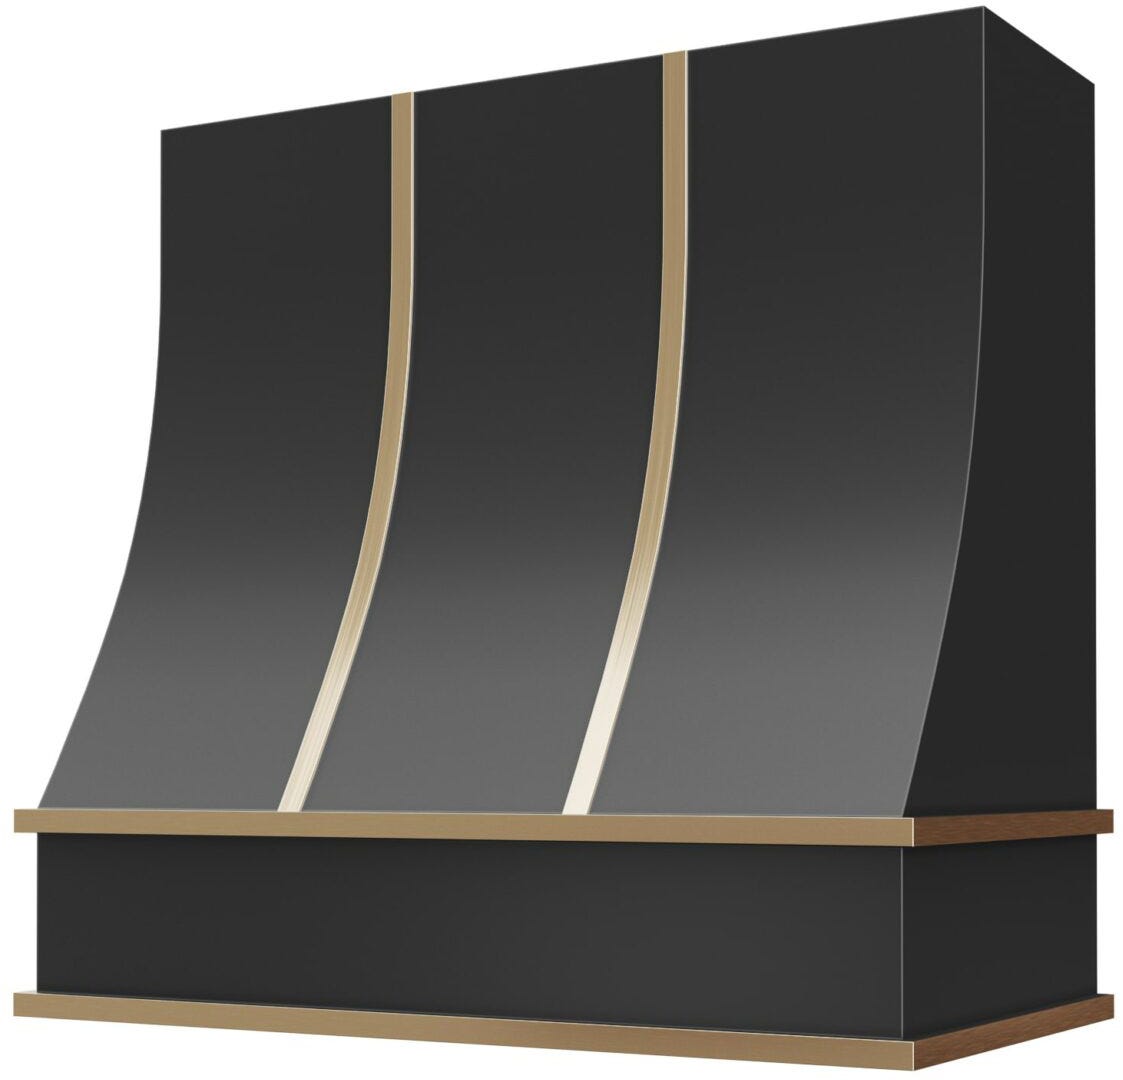 black Hoodsly range hood with gold strapping